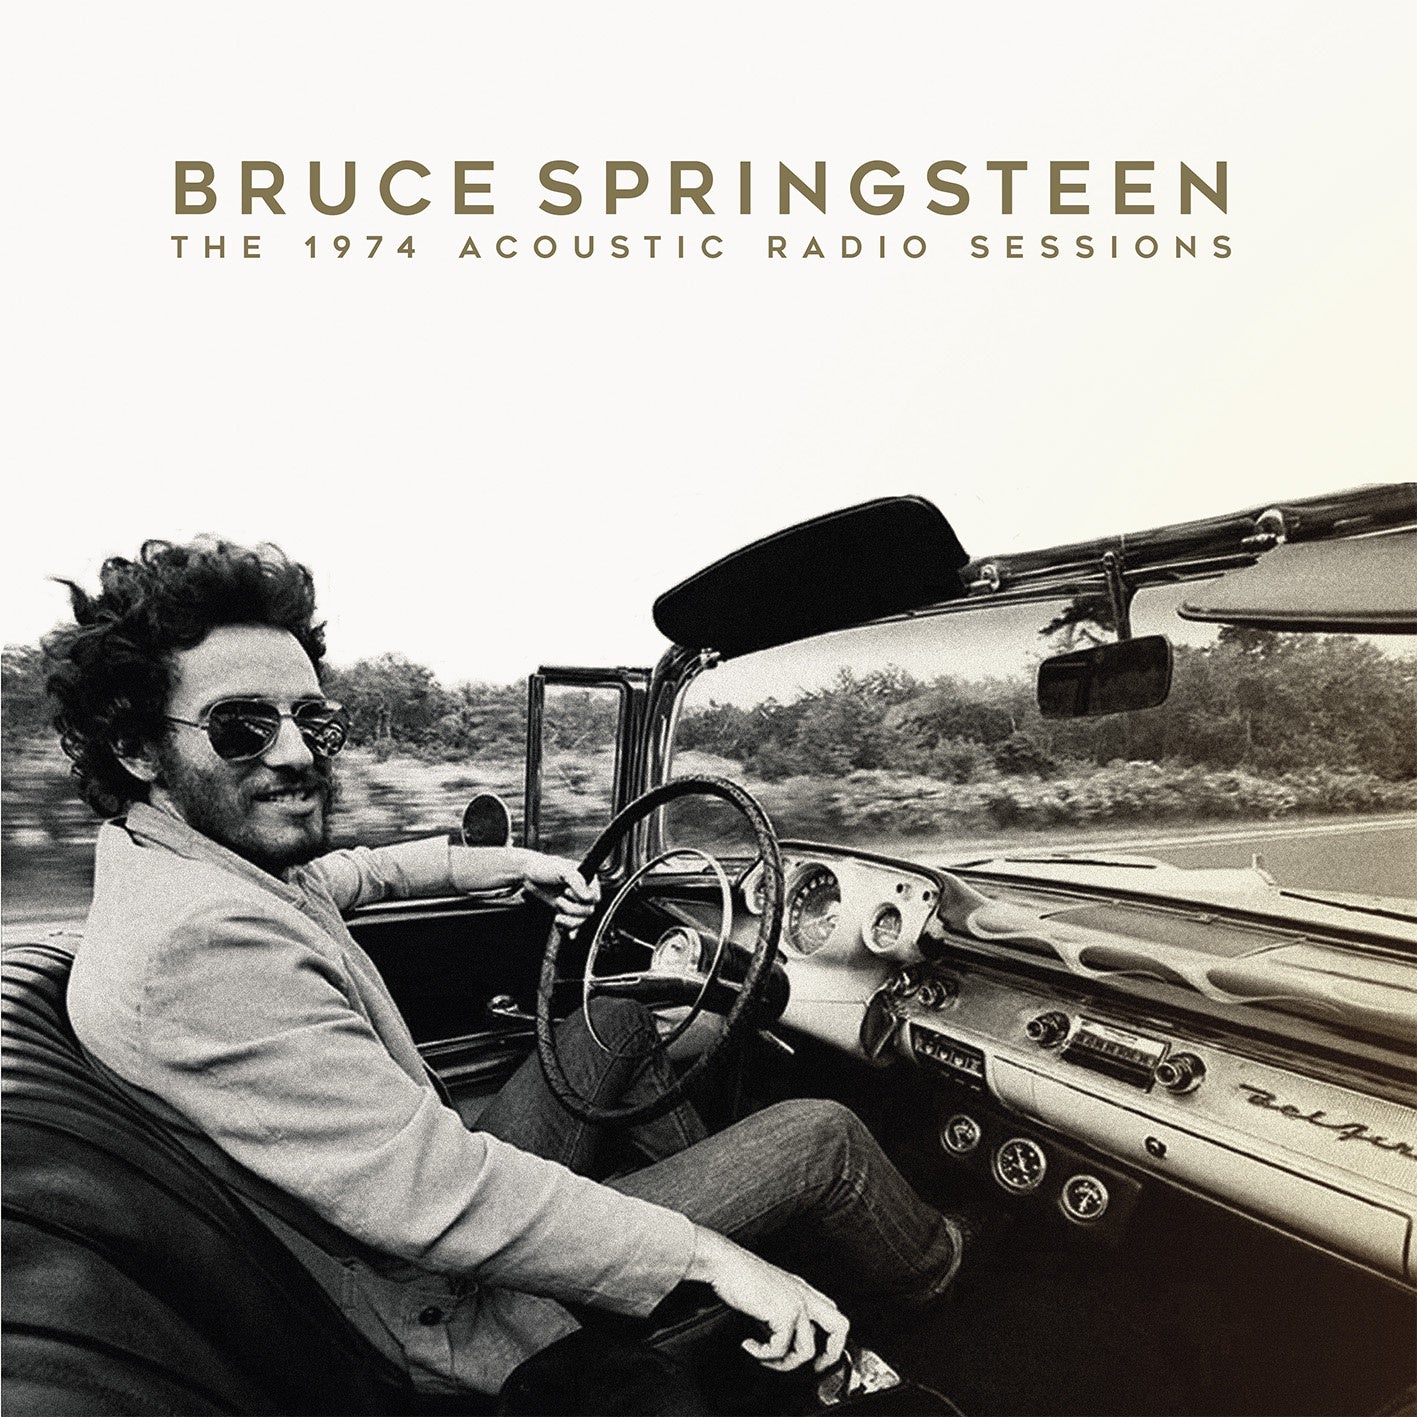 SPRINGSTEEN BRUCE-THE 1974 ACOUSTIC RADIO SESSIONS 2LP *NEW*